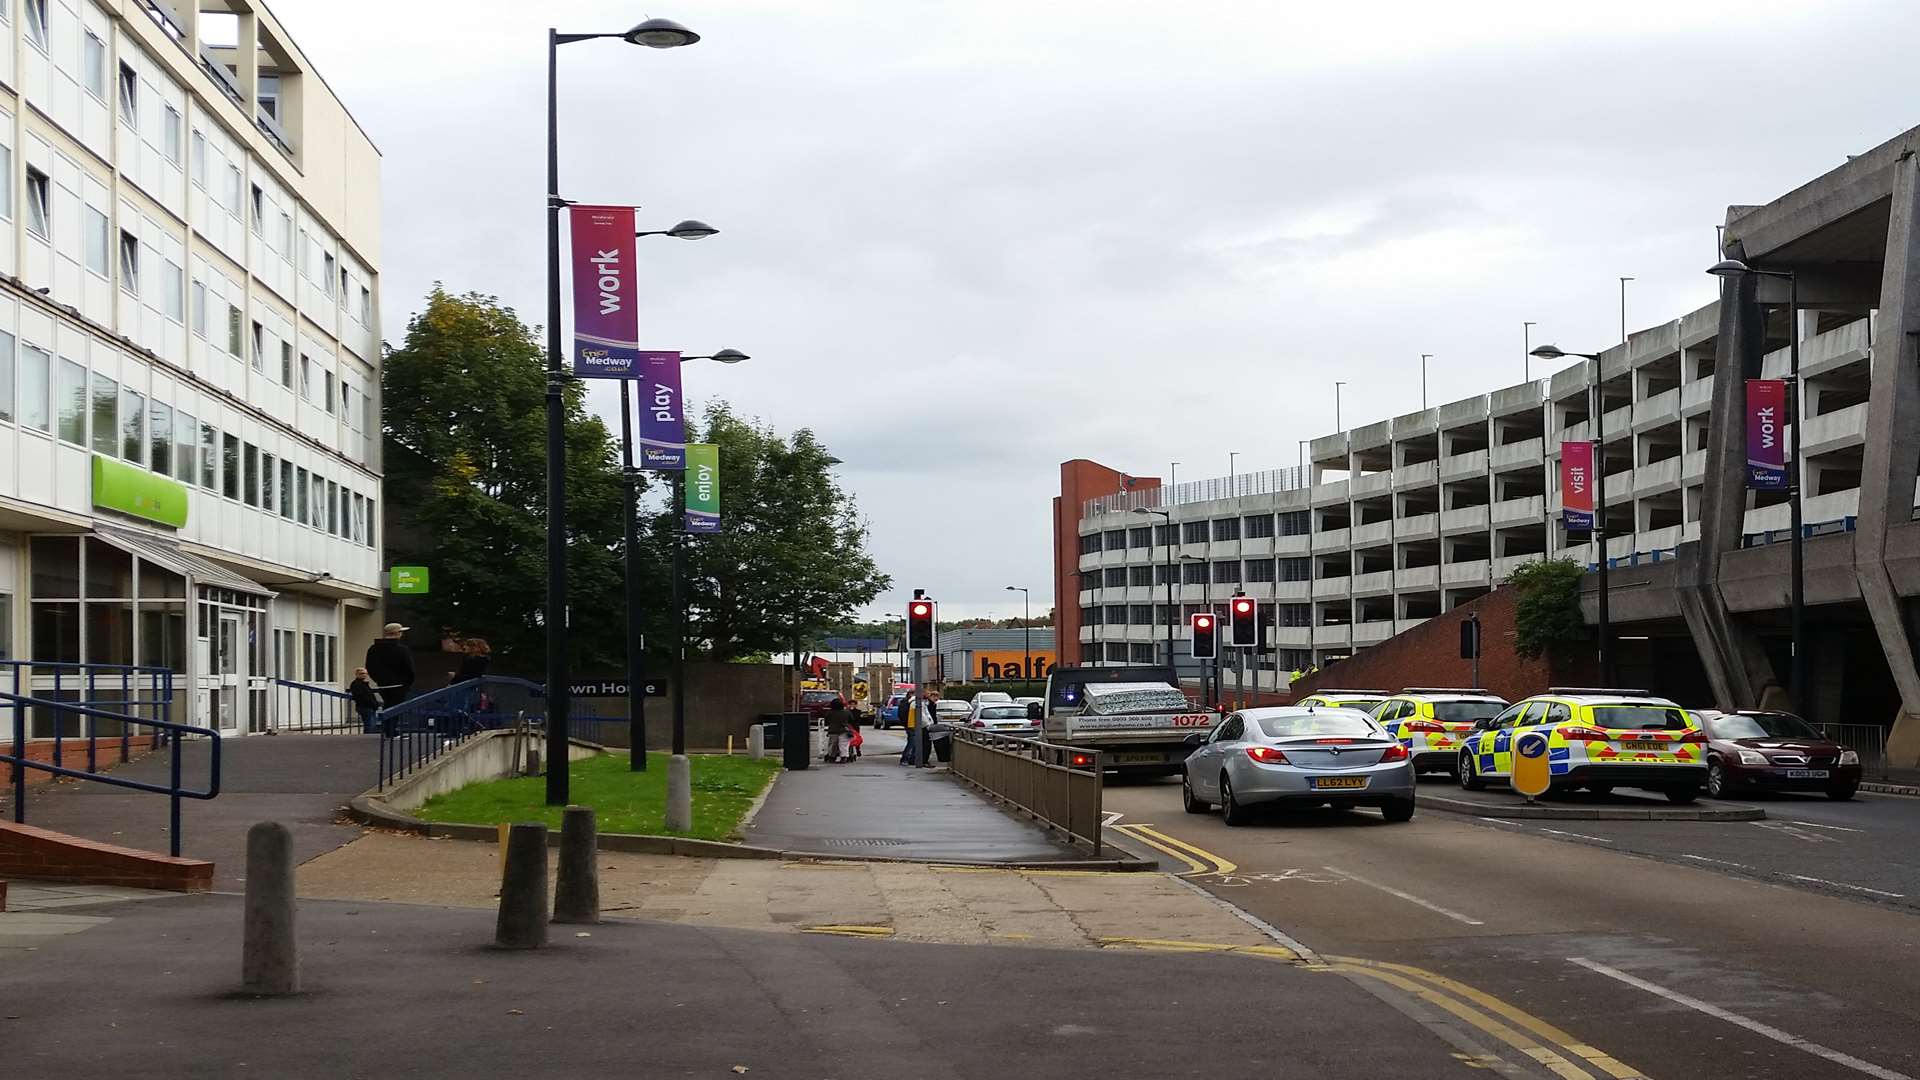 Emergency services were called to the shopping centre